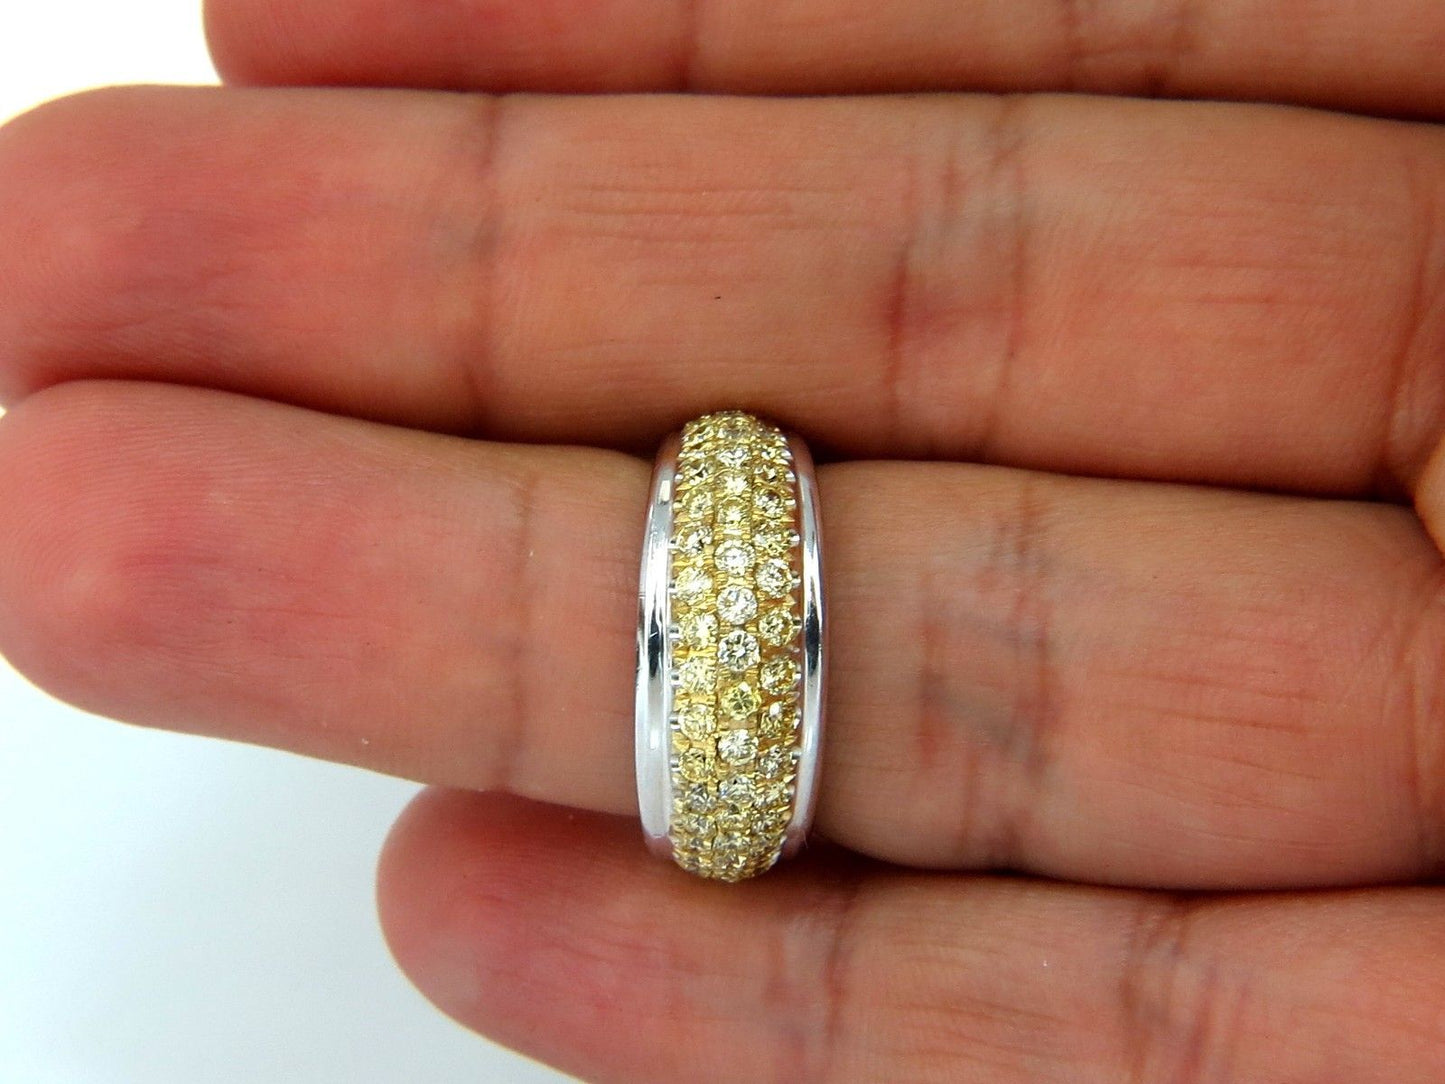 1.60ct Natural Fancy Yellow Diamonds Ring 18kt